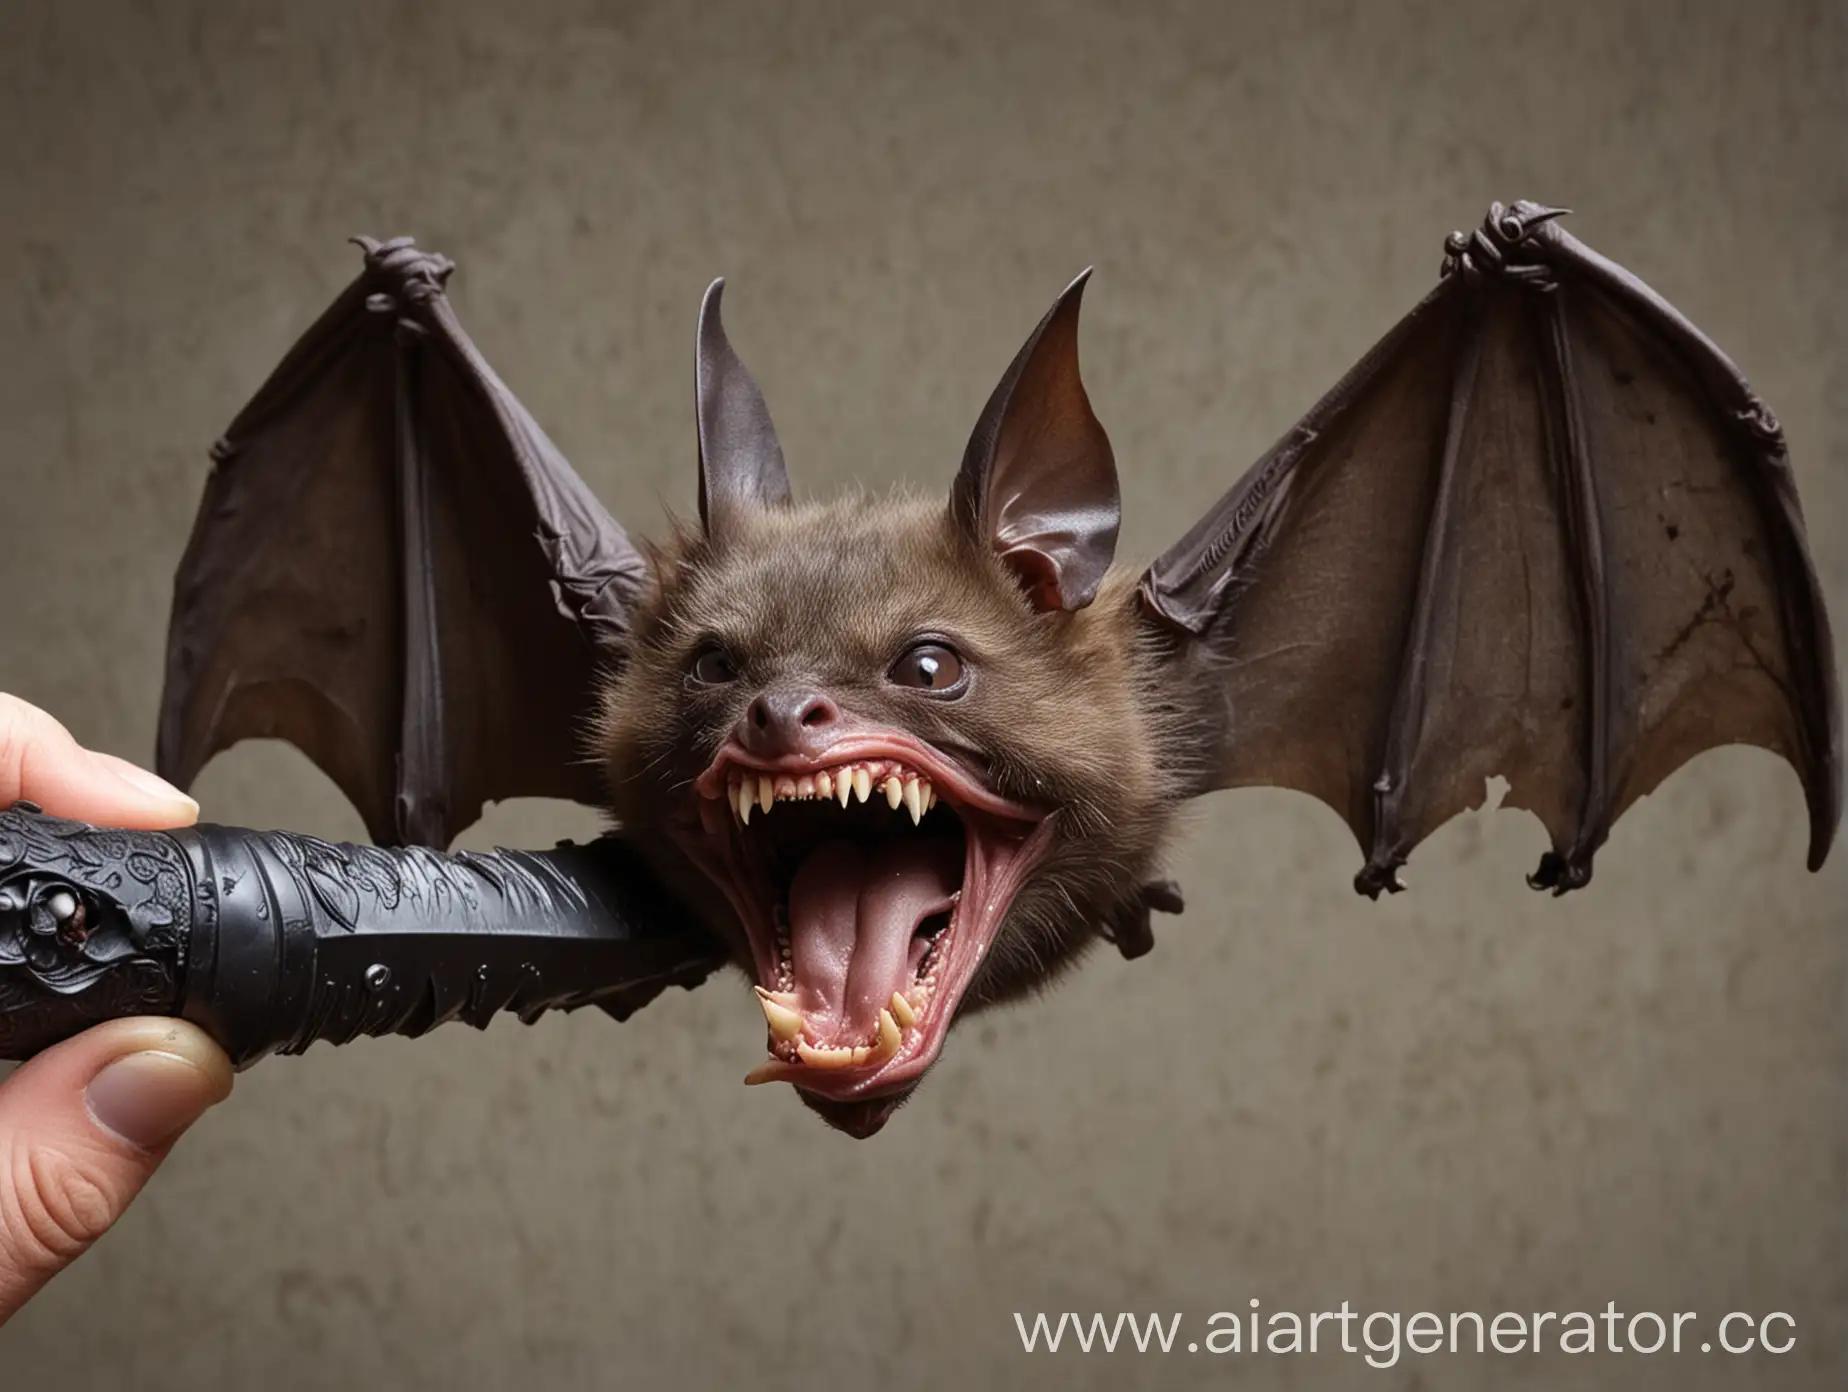 Unusual-Bat-Holding-Blade-in-Mouth